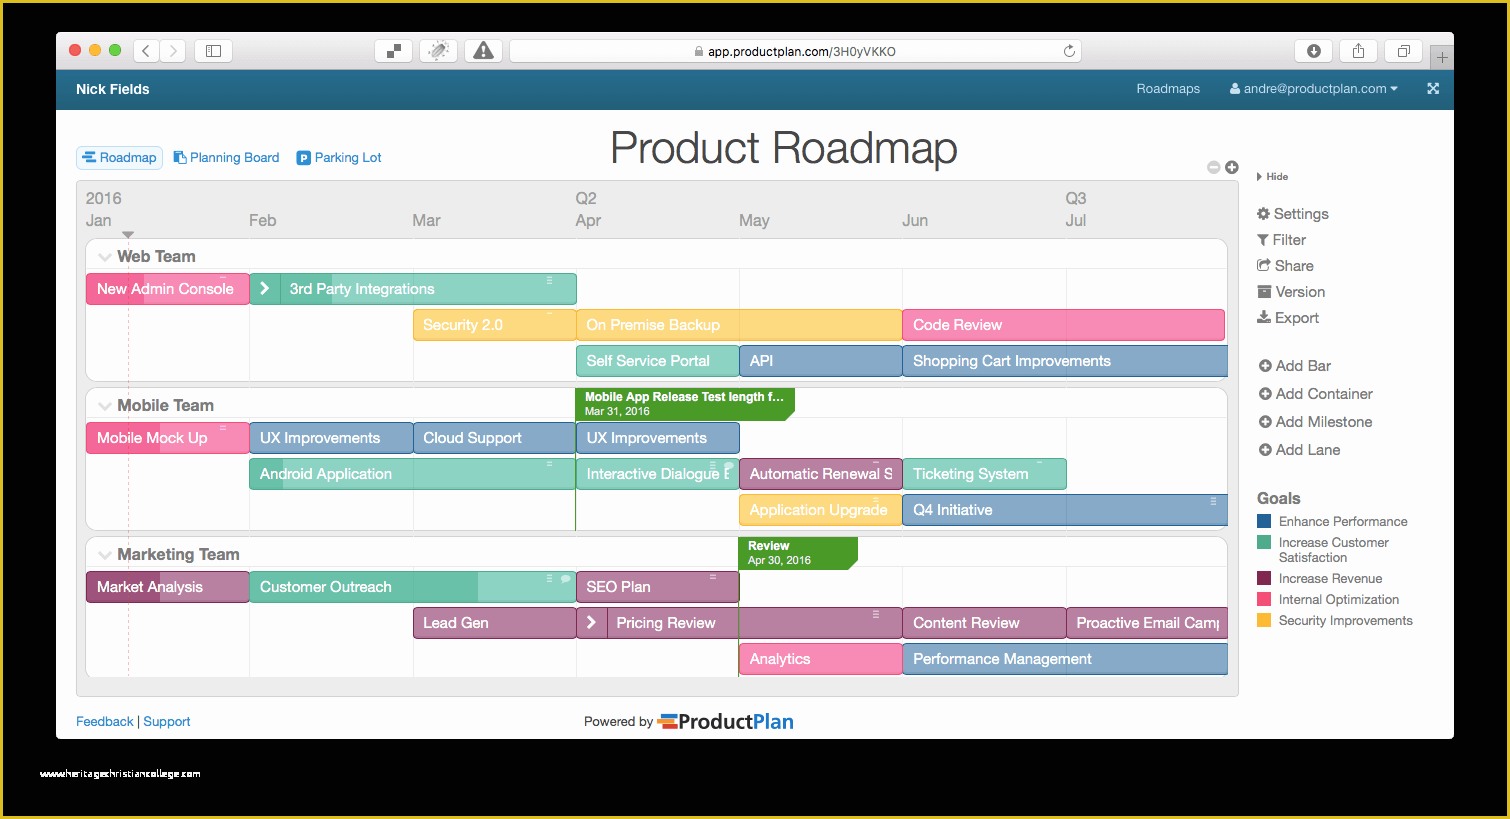 Product Roadmap Templates Powerpoint Download Free Of Using top Down Product Strategy to Plan Your Roadmap